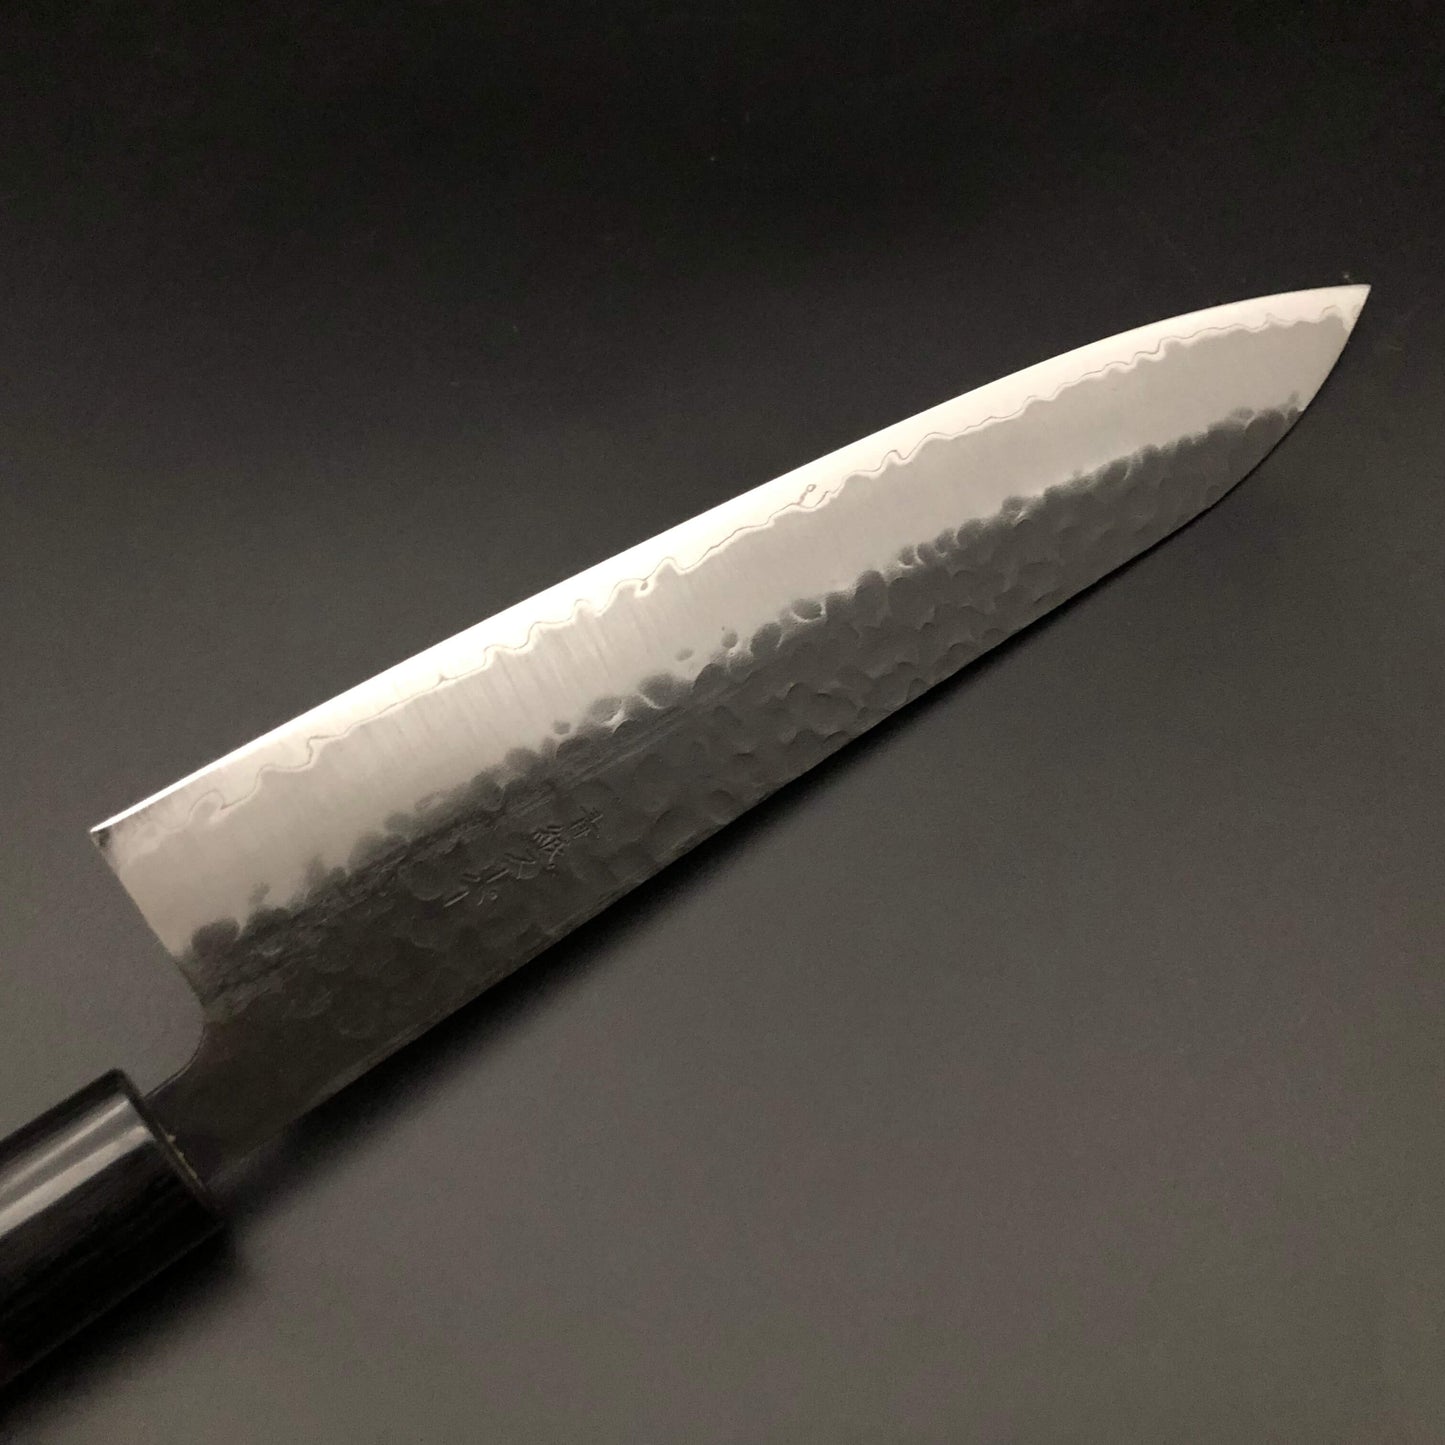 Gyuto 240㎜ Carbon Steel  Rosewood